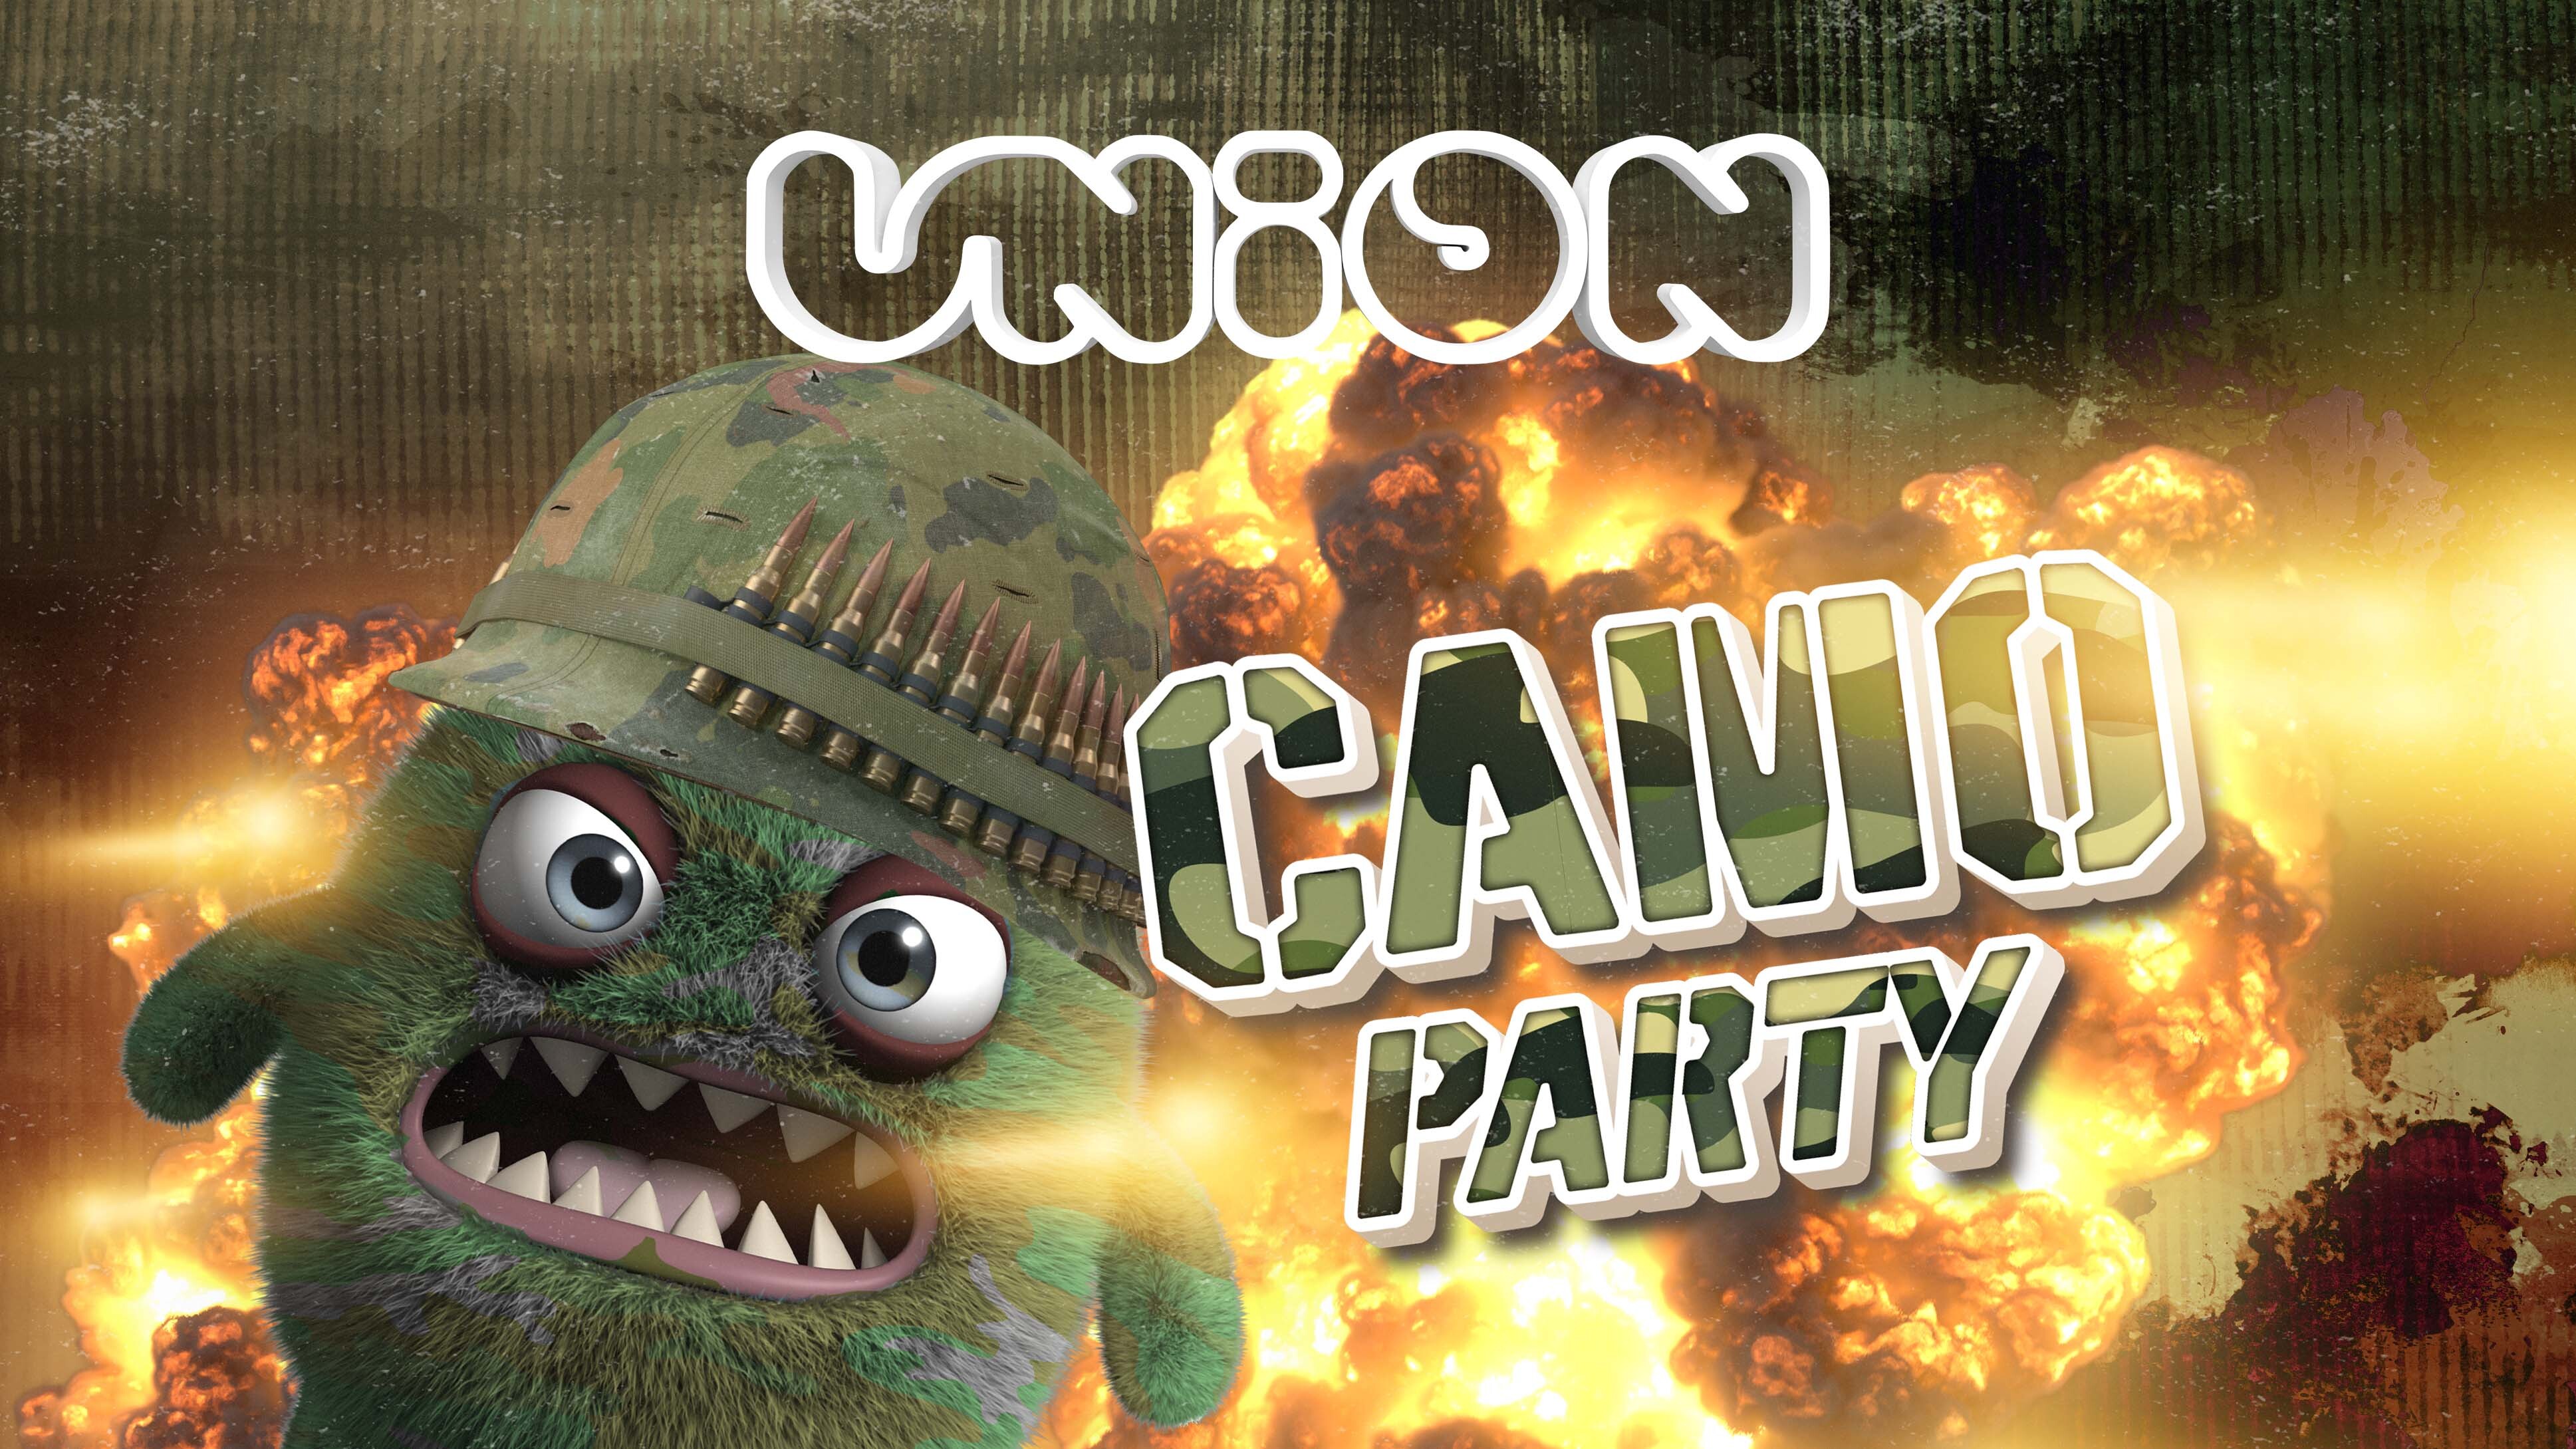 TONIGHT! UNION TUESDAY’S AT HOME | CAMO PARTY!